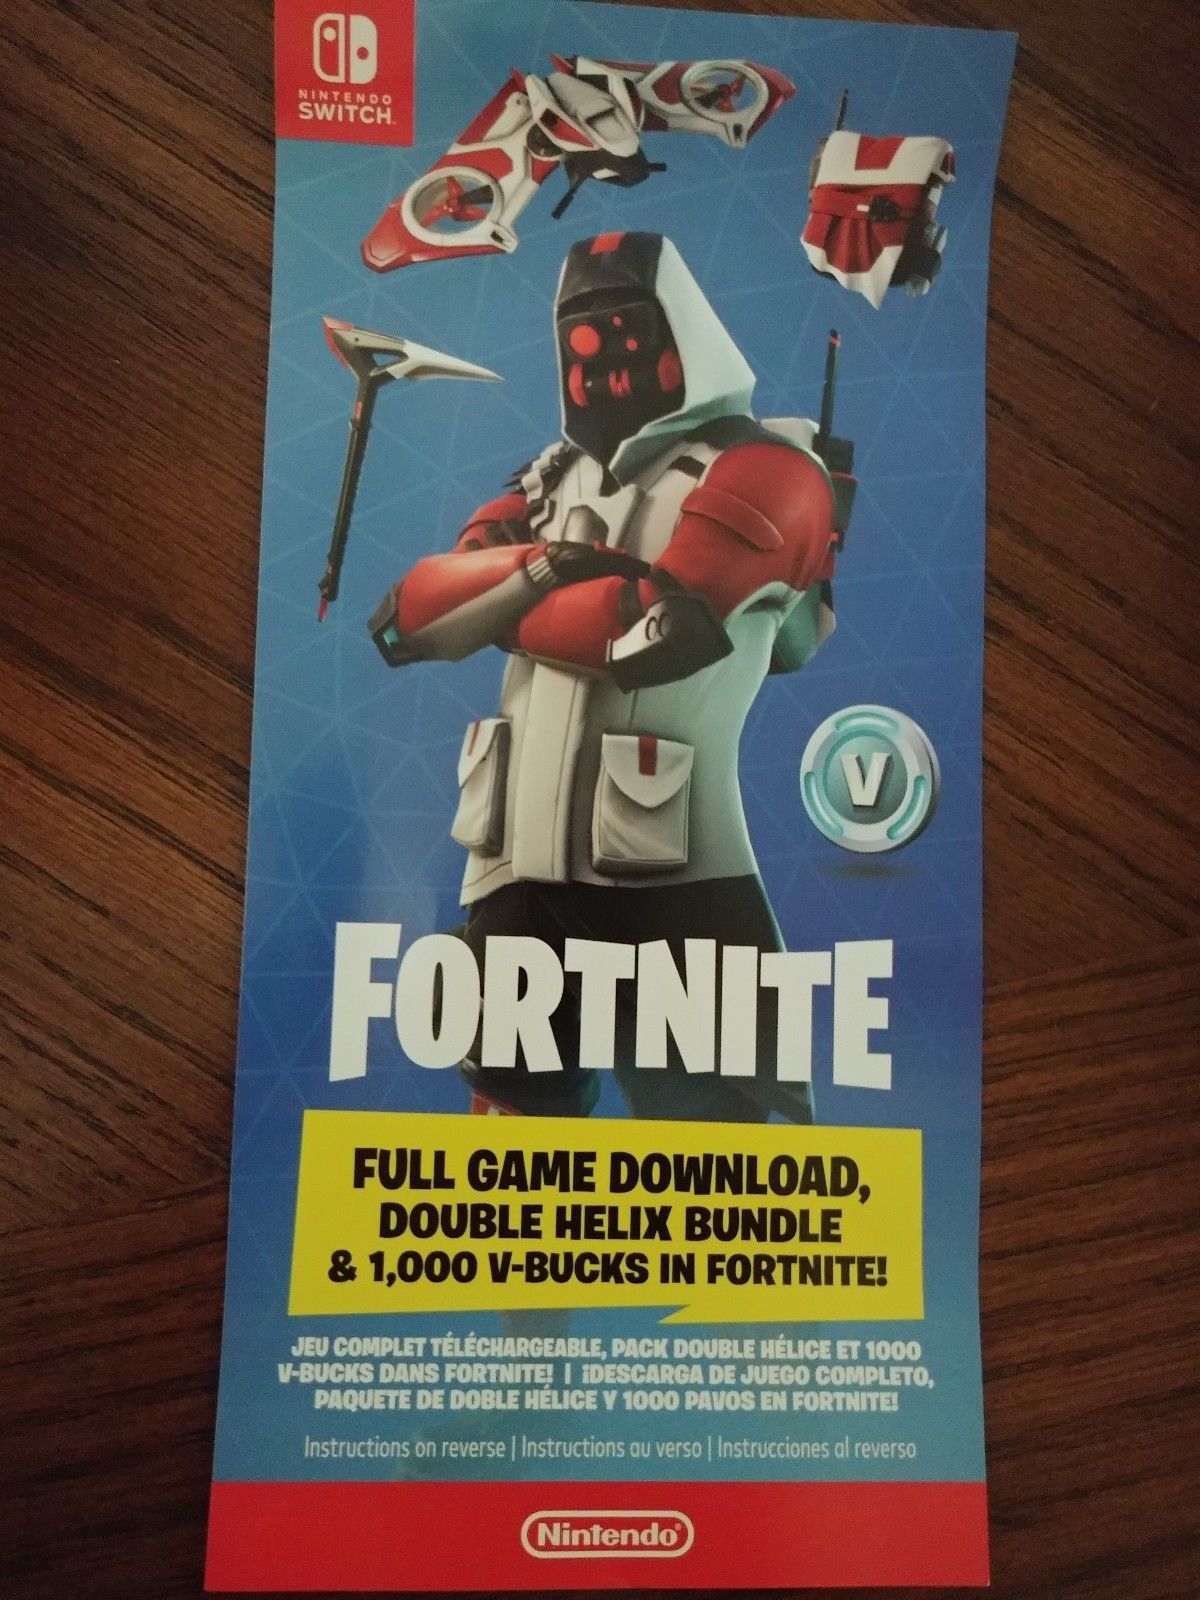 Fortplug Exclusive Skins Seller On Twitter Ikonik Skin Is 25 Account Details Needed Eon Is 45 Code And Double Helix Is 70 Code I Only Have 1 Double Helix Code So Be